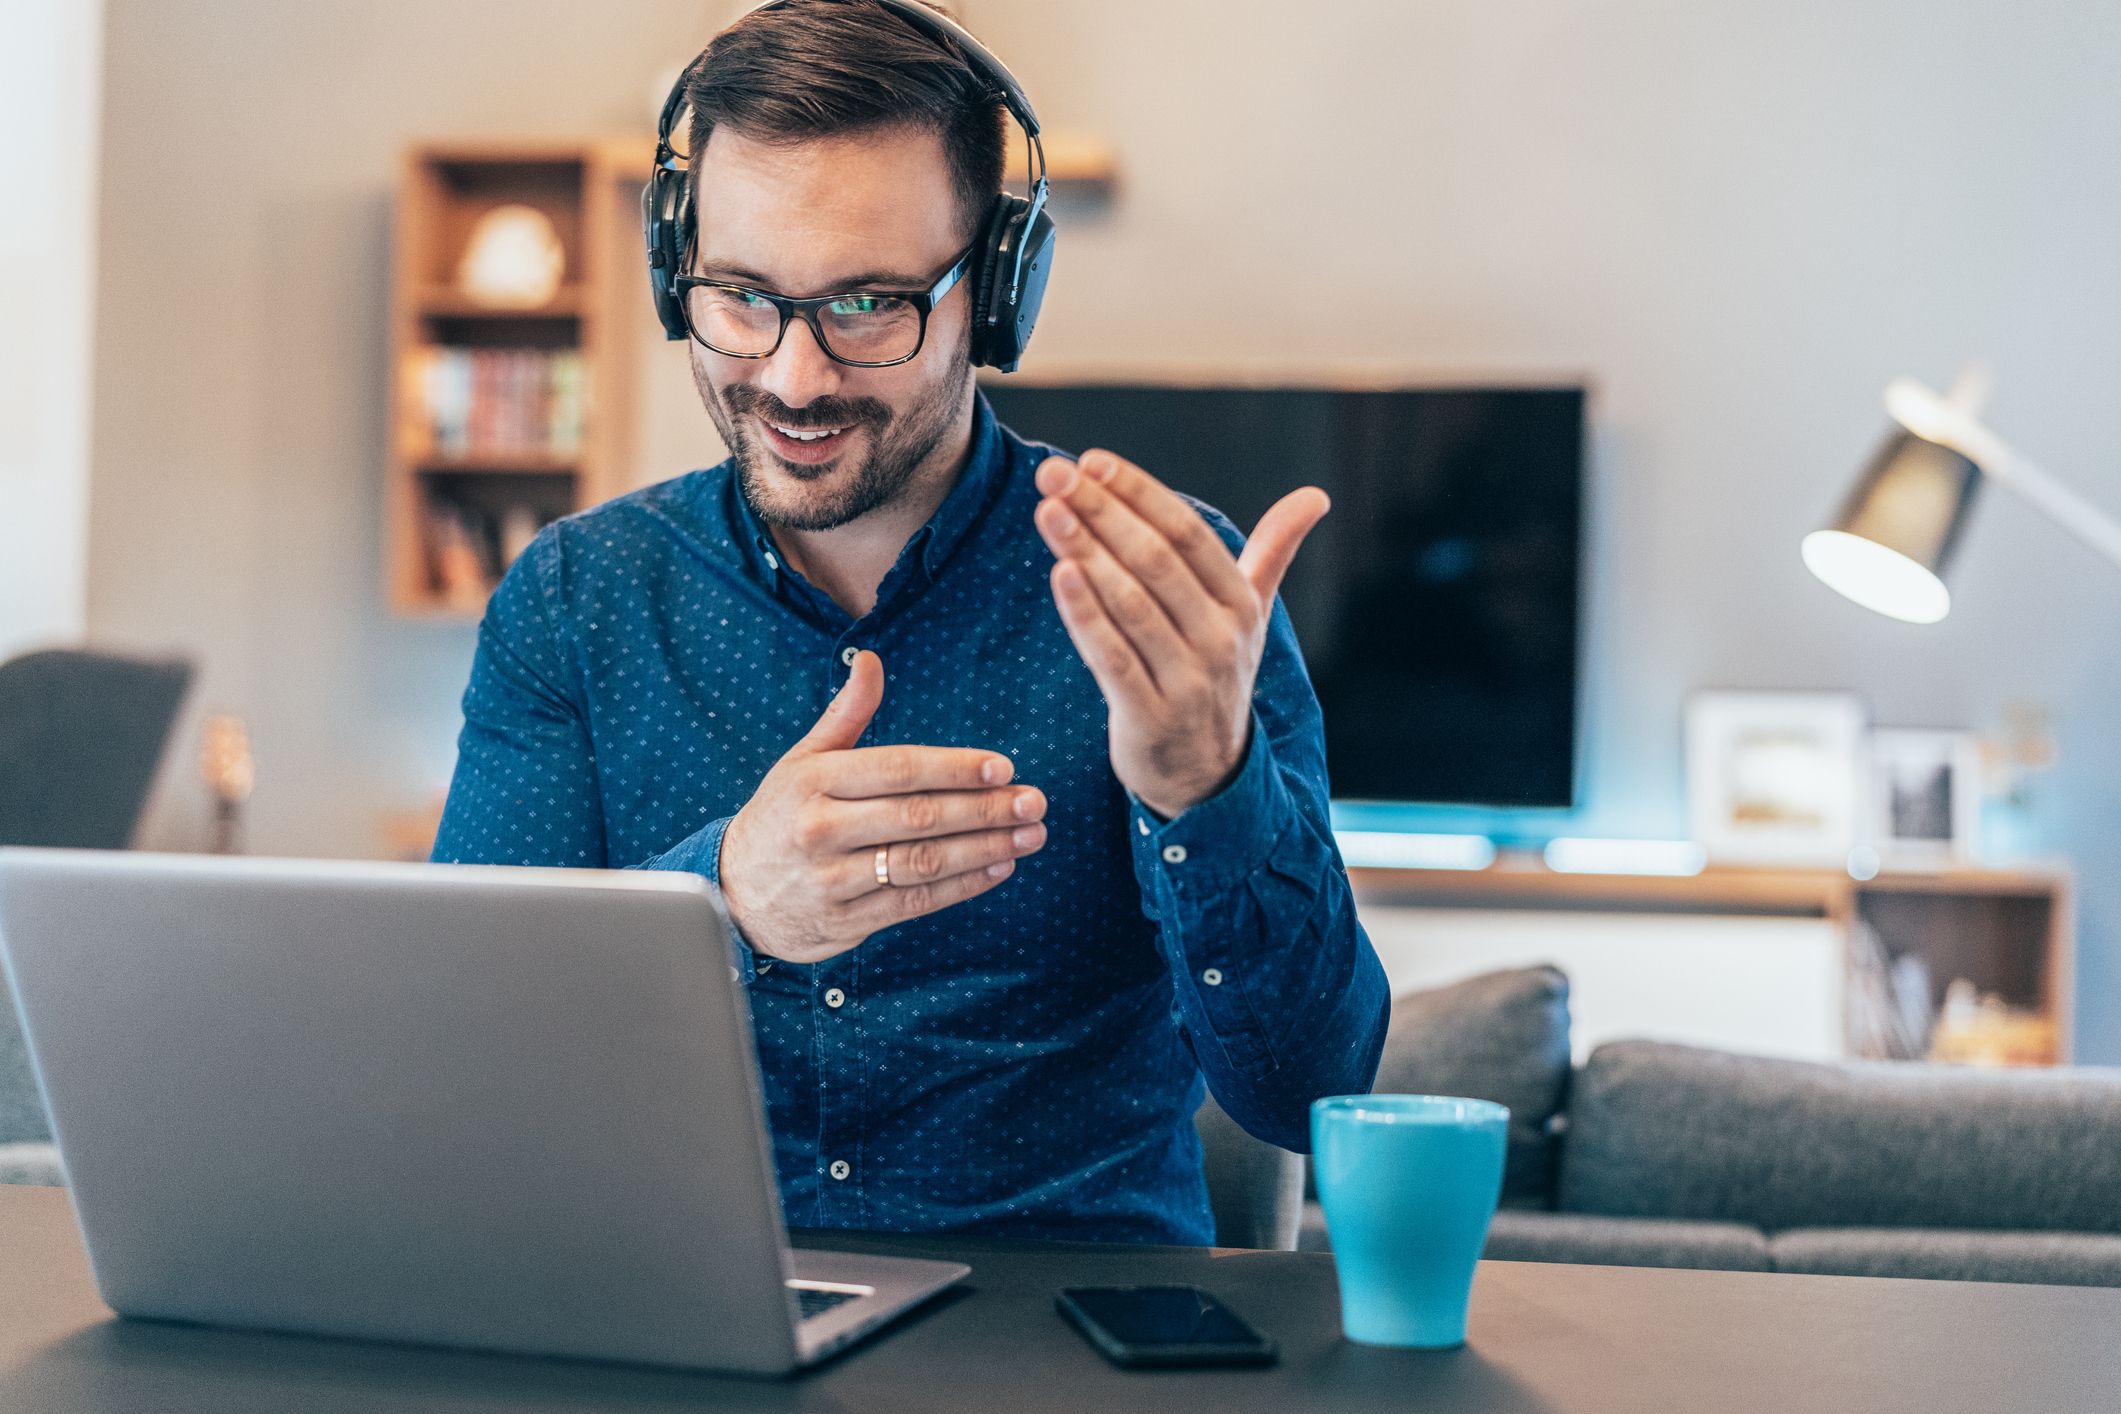 10 Headphones For Remote Work To Stay Focused And Productive